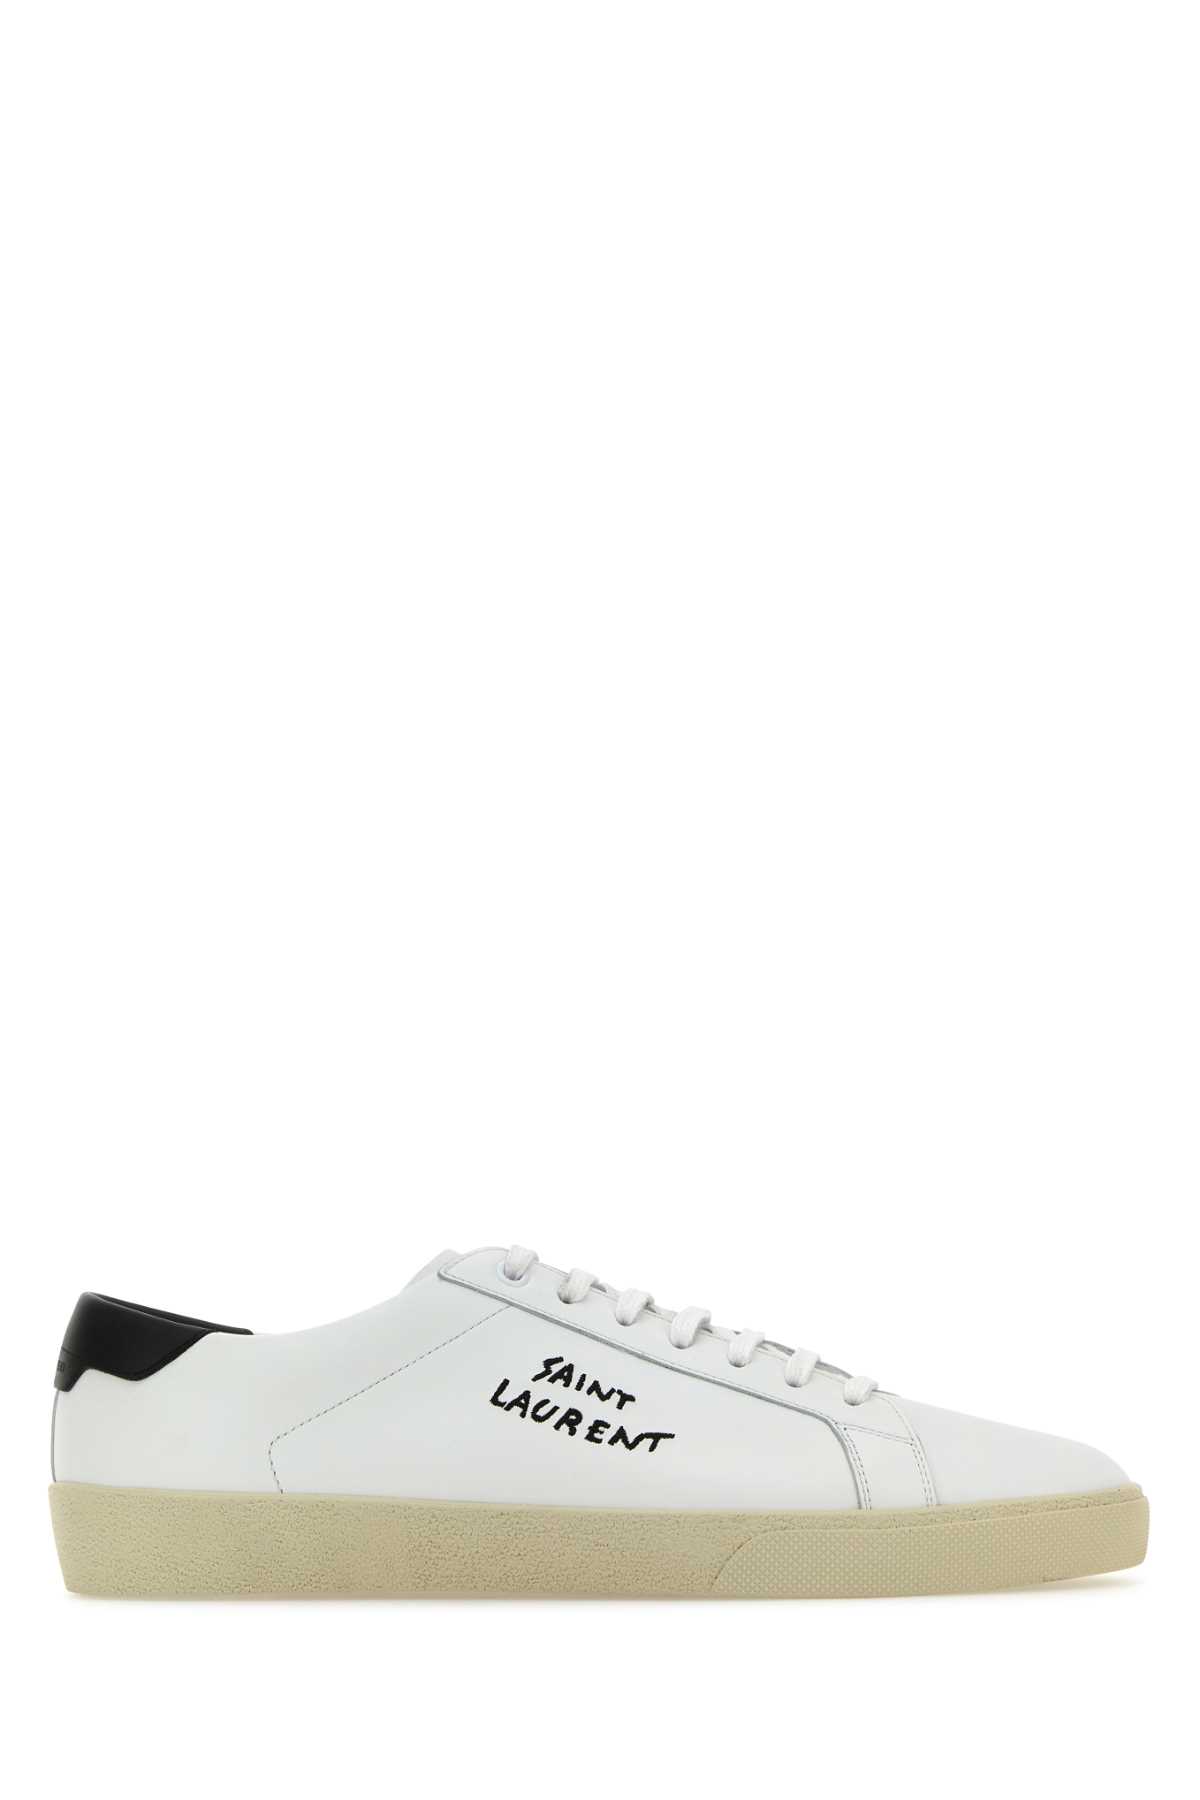 Saint Laurent White Leather Court Sl/06 Sneakers In Black